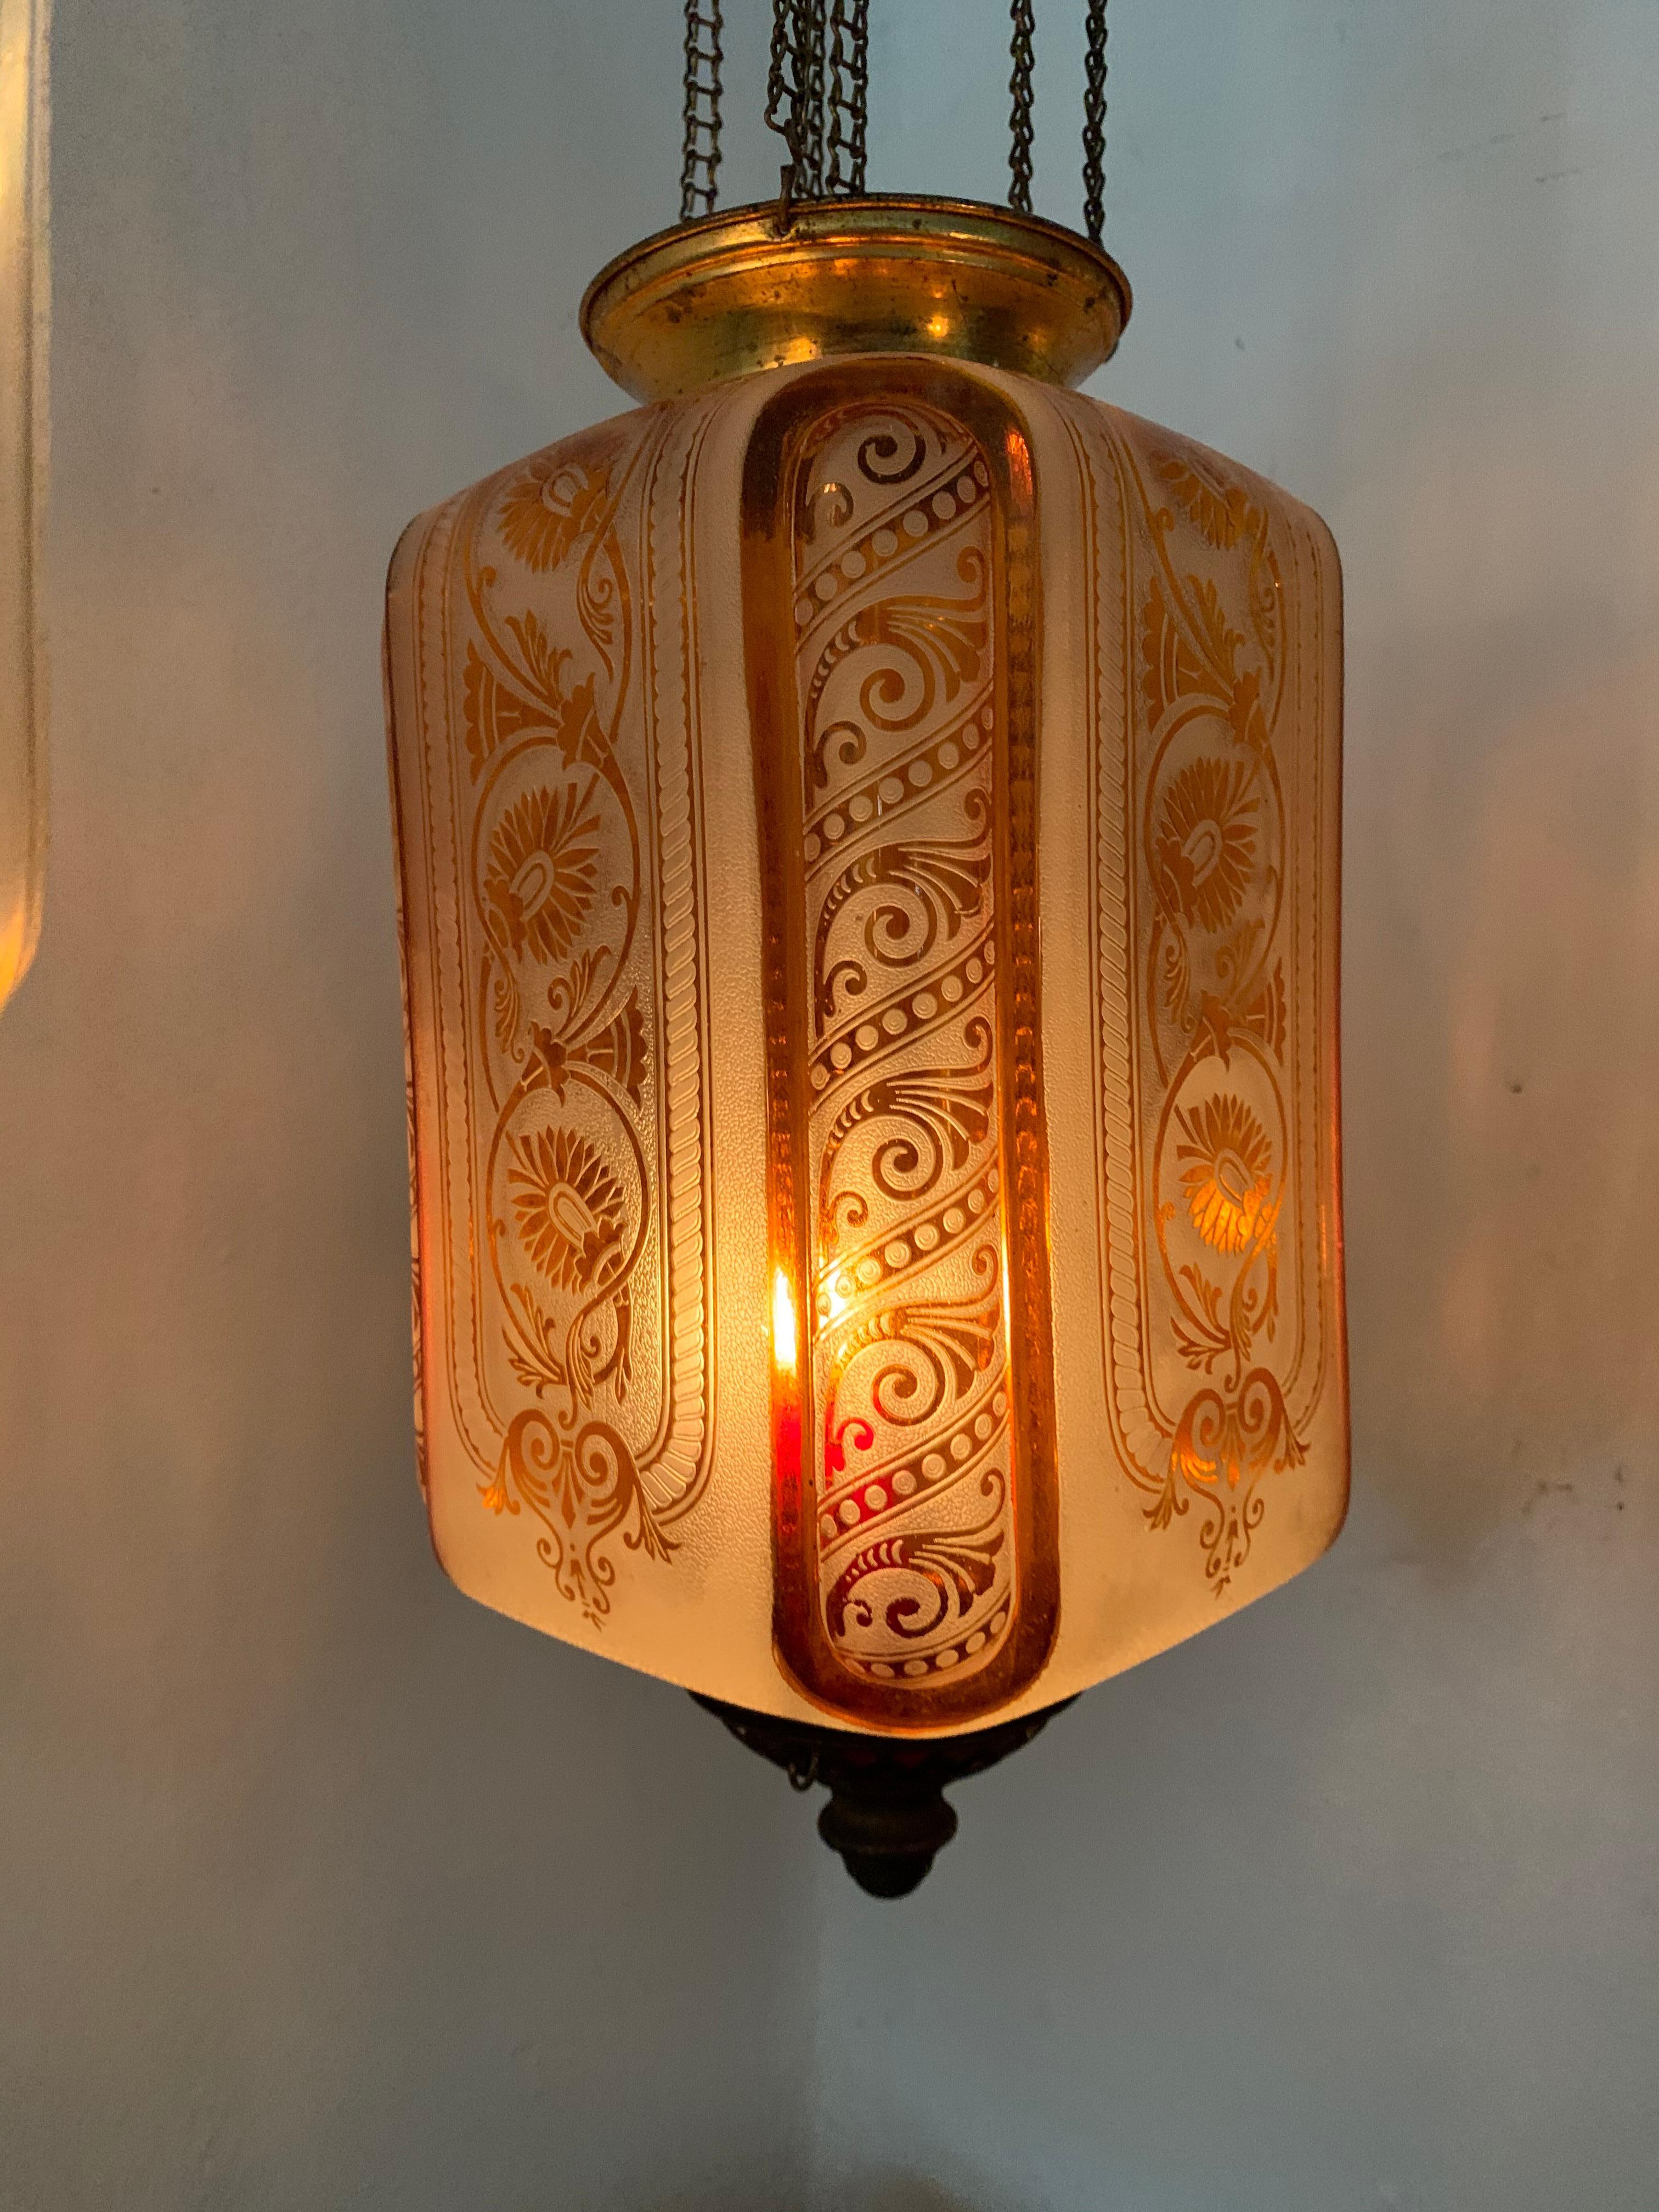 Late 19th or early 20th century glass Lantern by Baccarat France, marked Baccarat Depose.
Produced in an Art Nouveau style with palmettes and scrolls
It can hold a candle as depicted (we recommend using battery operated candles for safety issues)